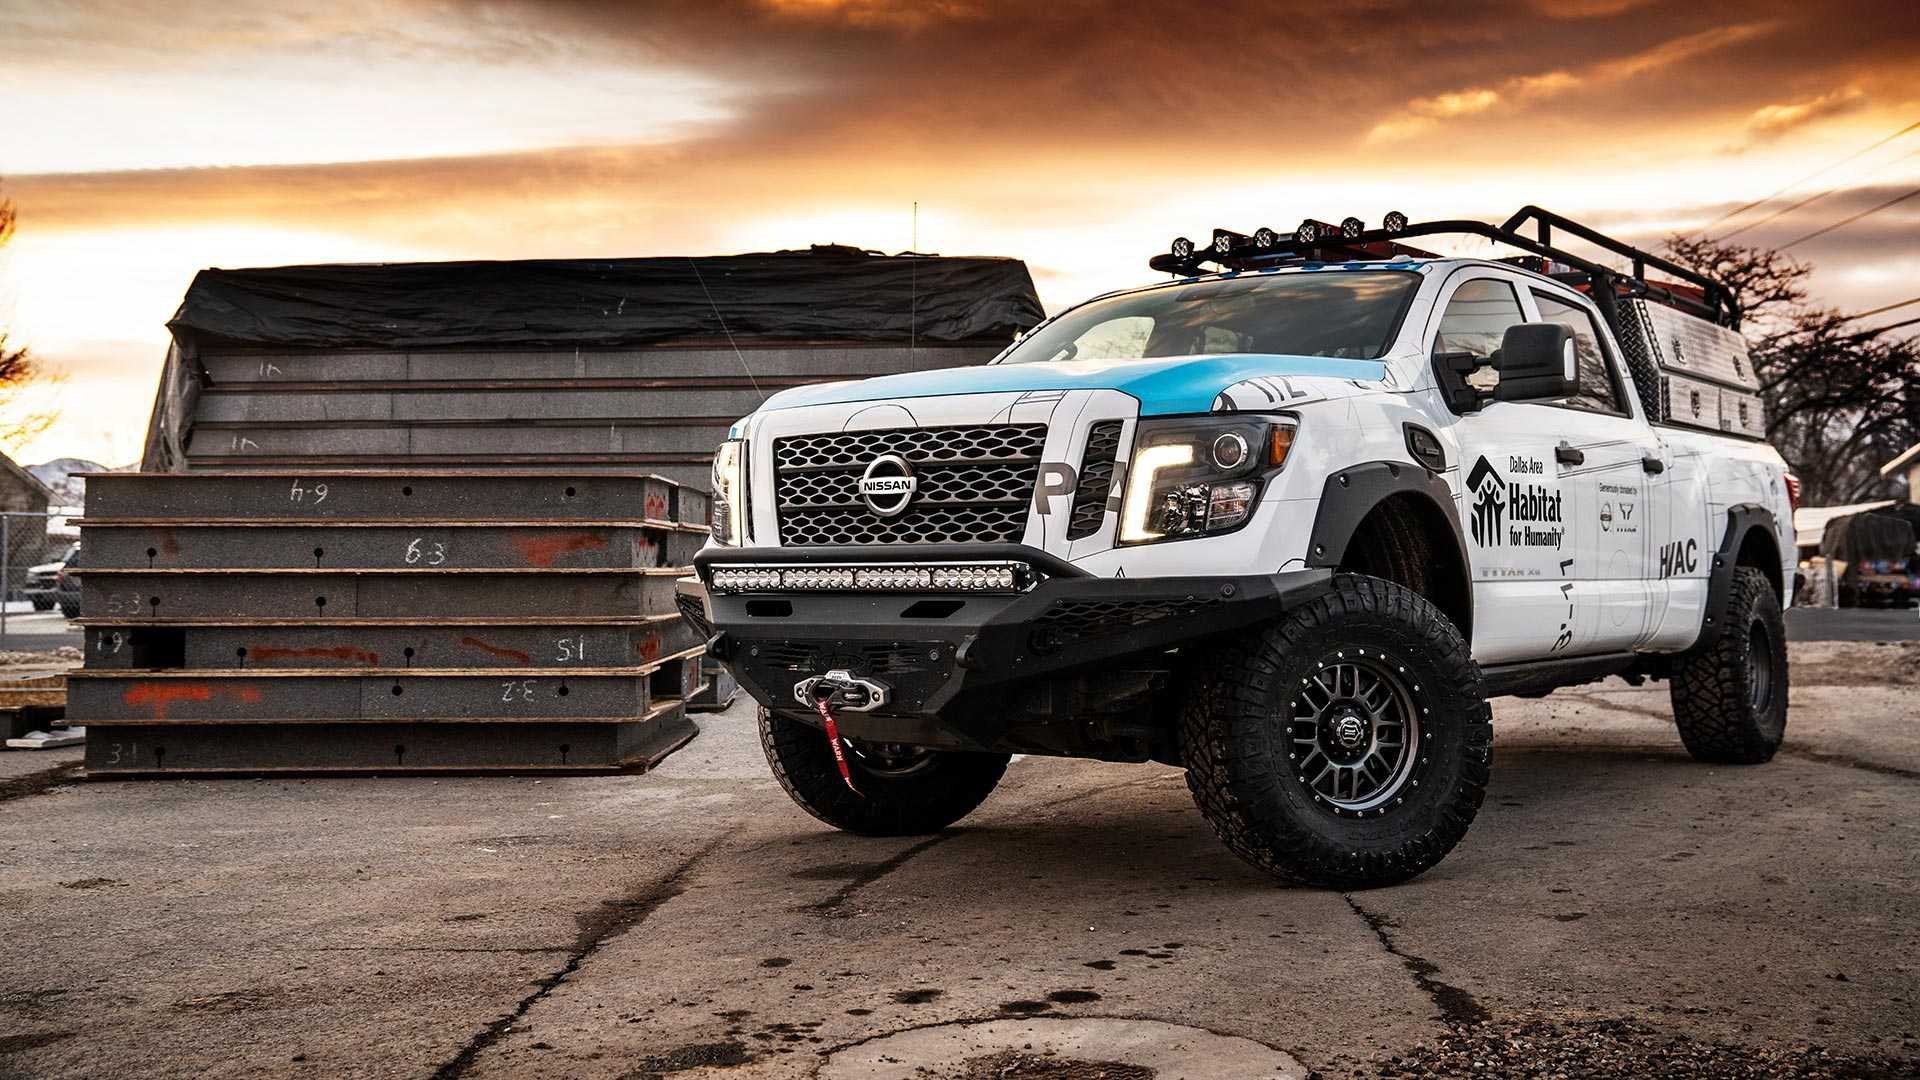 Nissan truck accessories loaded into a truck that's ready to ride.